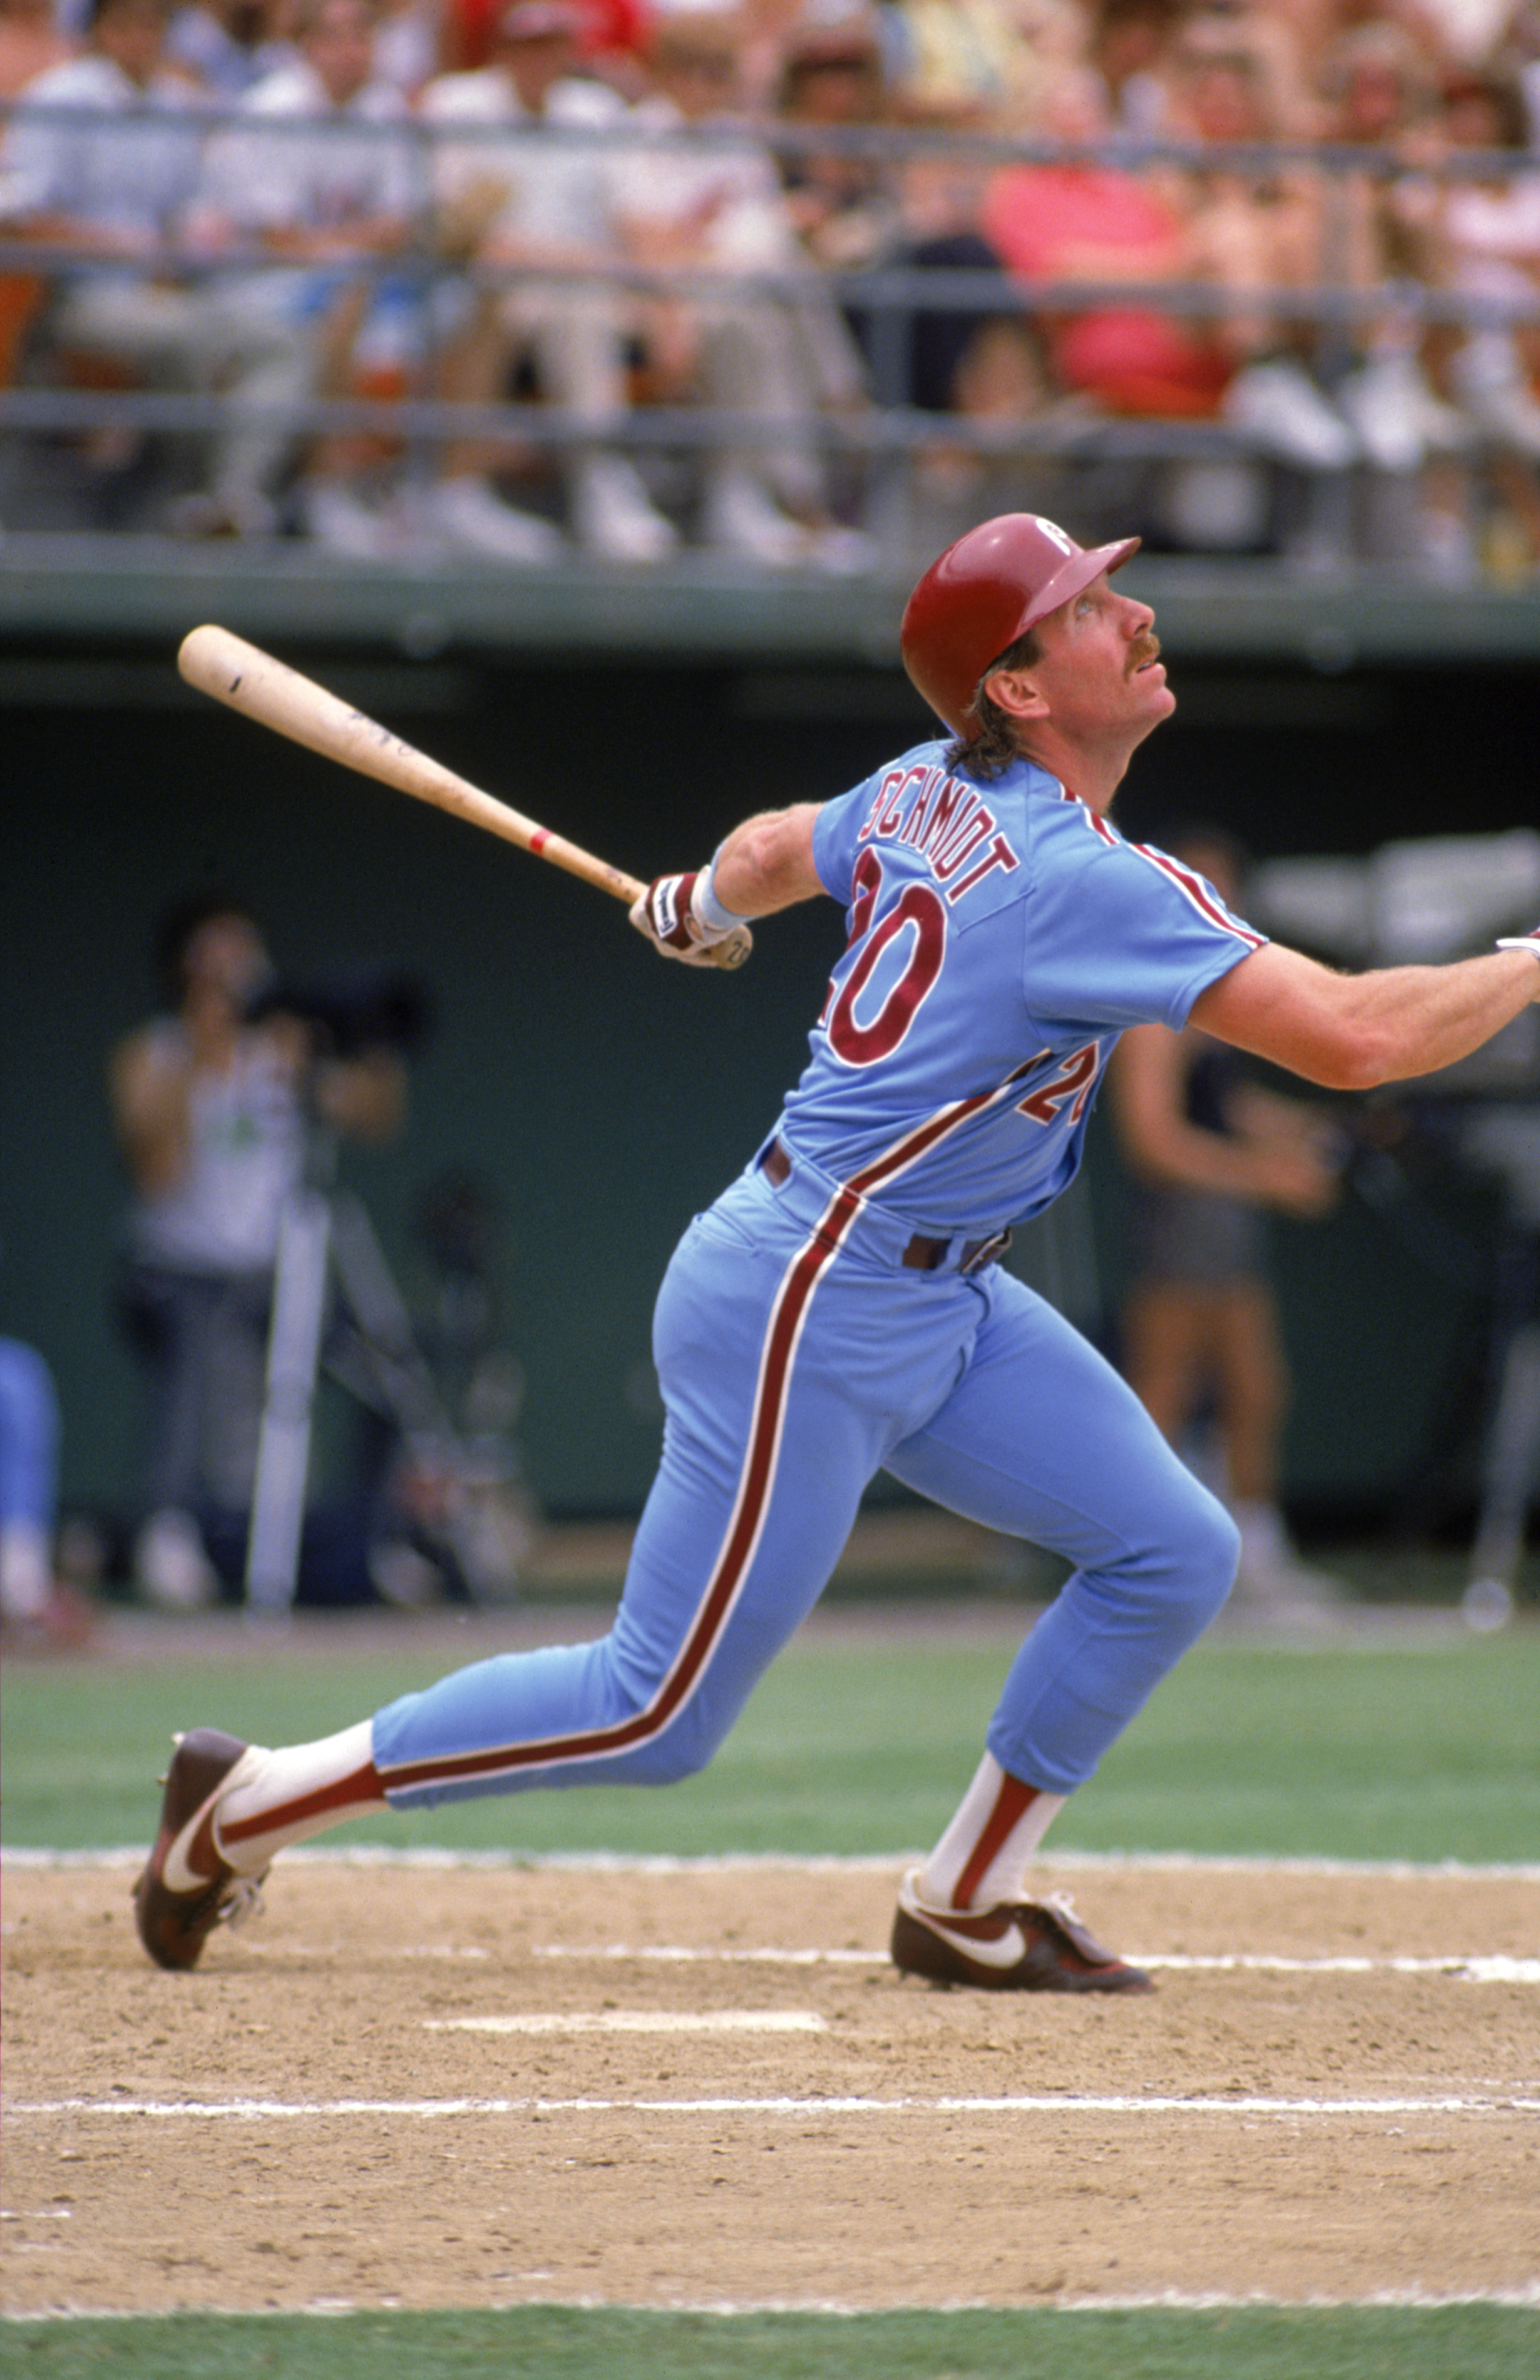 SAN DIEGO - 1987:  Mike Schmidt #20 of the Philadelphia Phillies watches the flight of the ball after a hit during a 1987 season game against the Padres at Jack Murphy Stadium in San Diego, California. (Photo by Stephen Dunn/Getty Images)